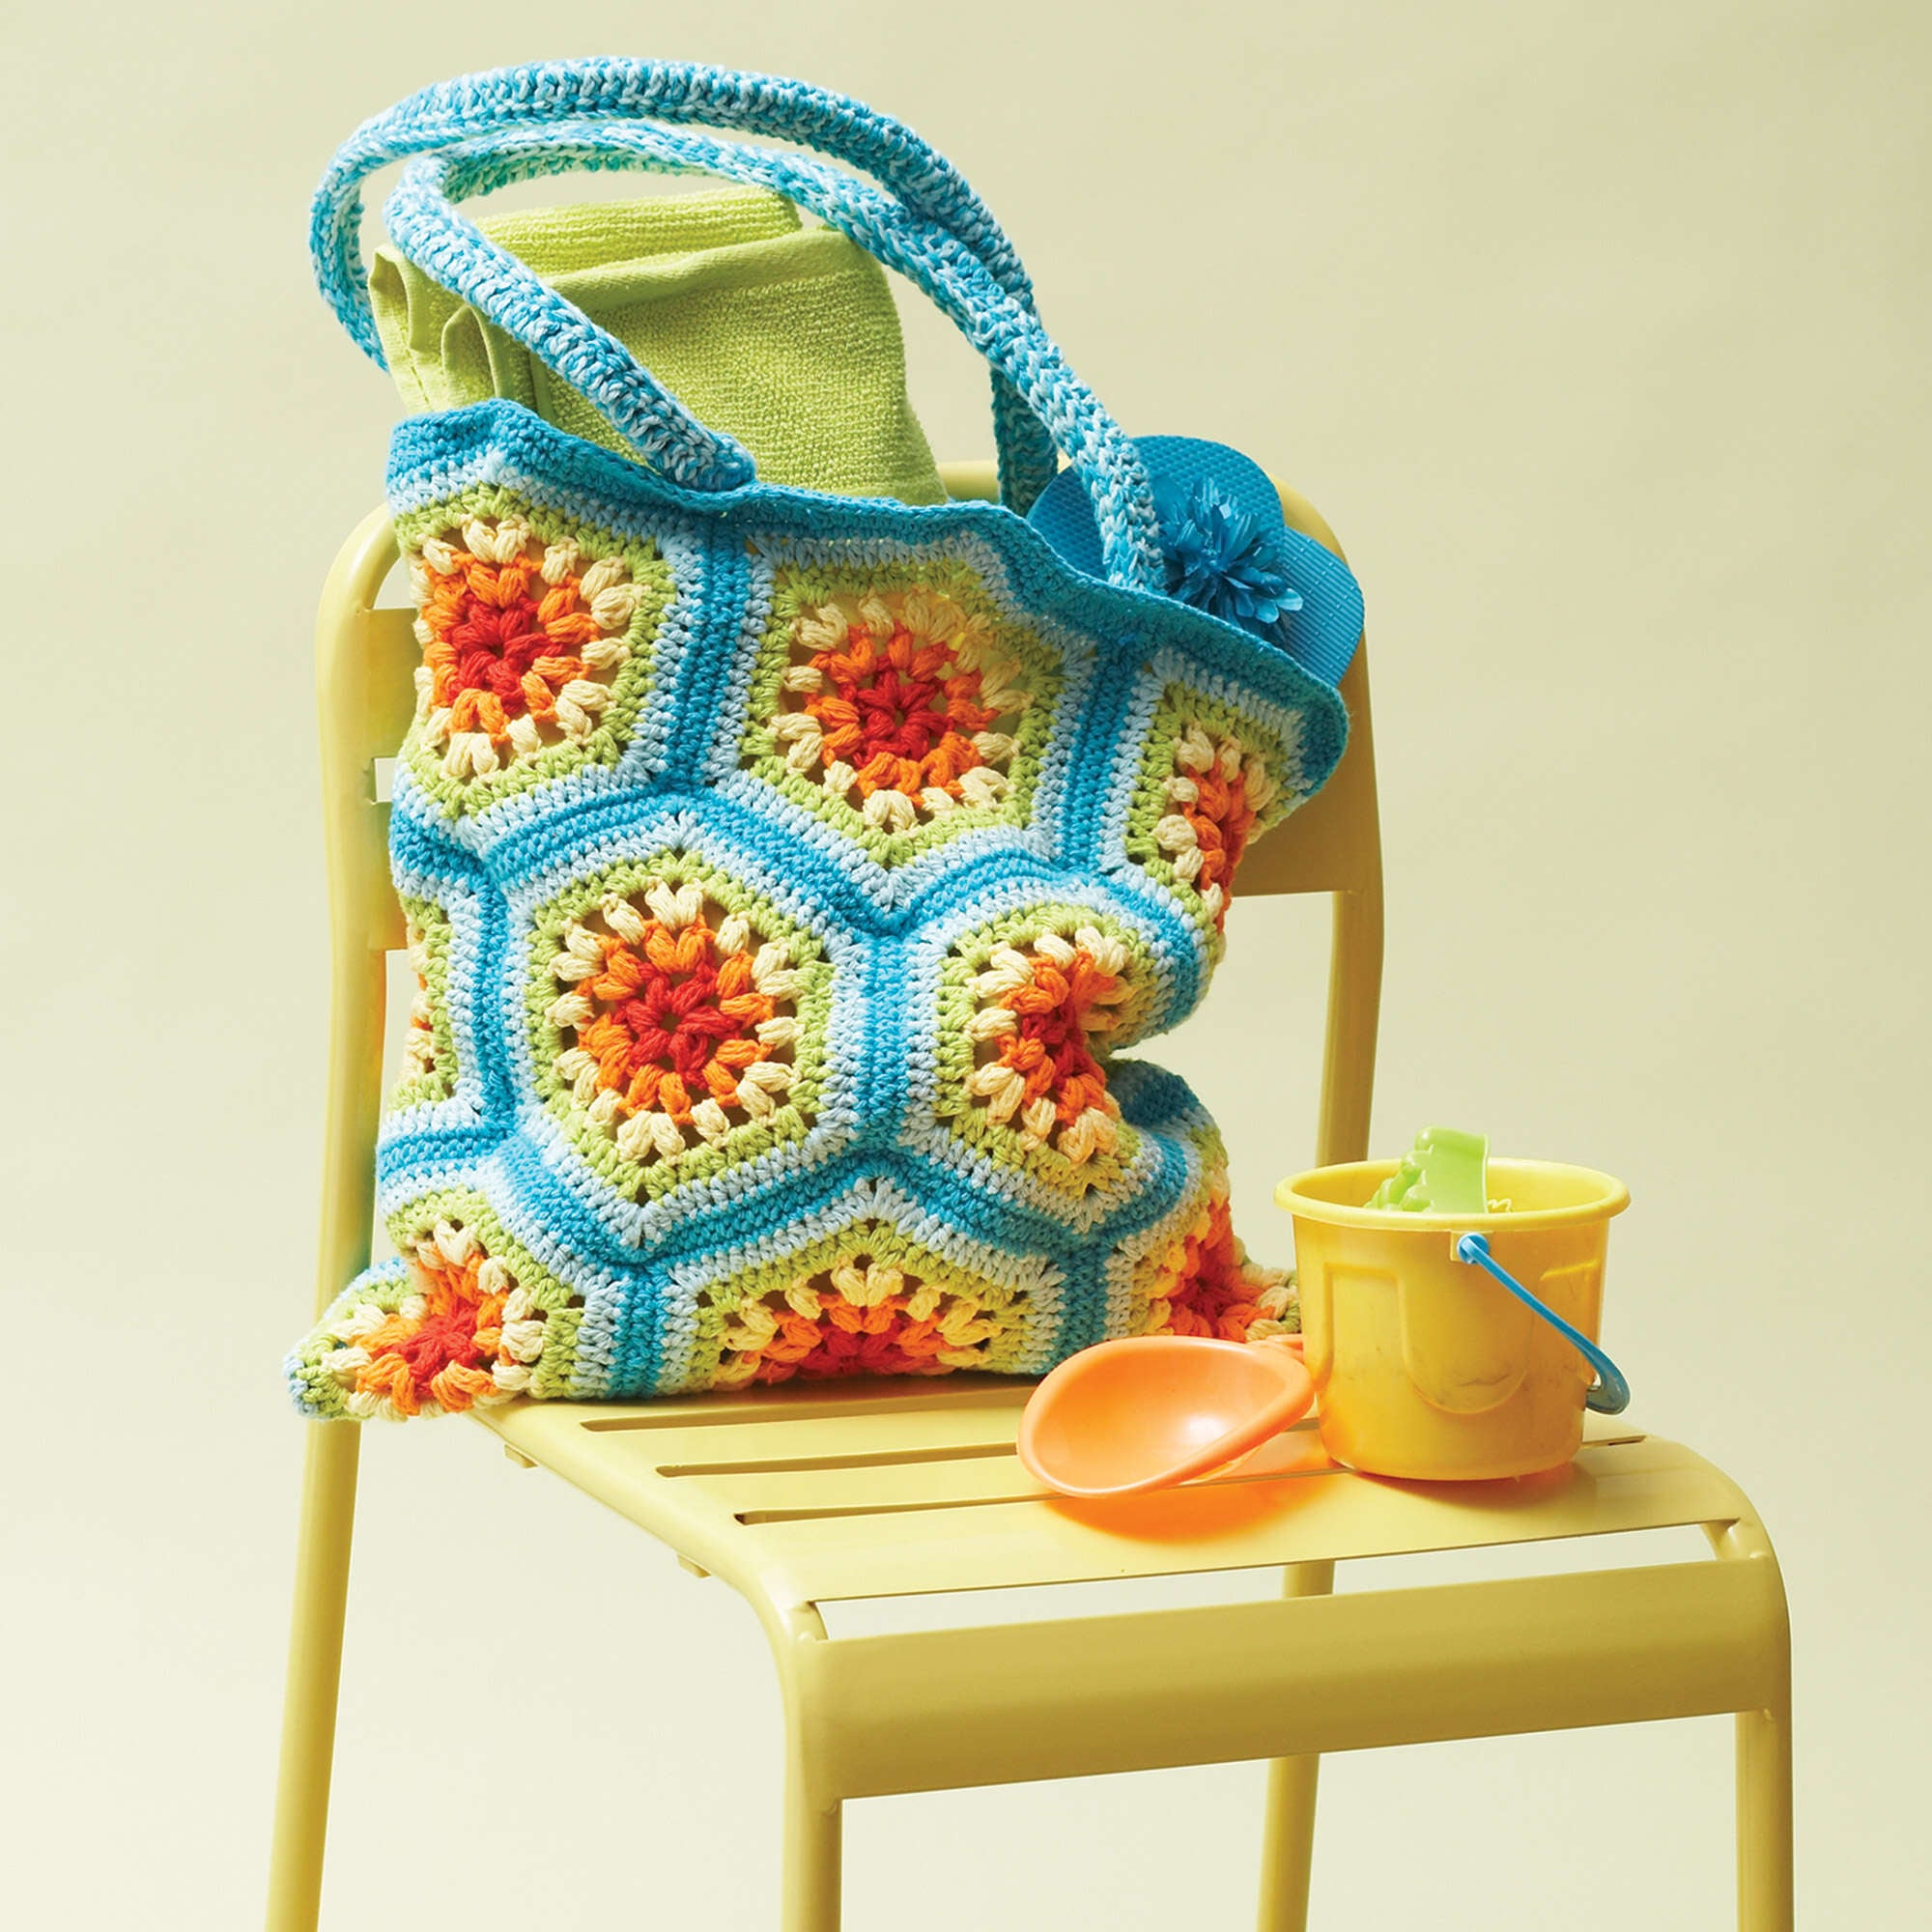 Crochet Farmers Market Bags - these make great gifts! | Jessie At Home